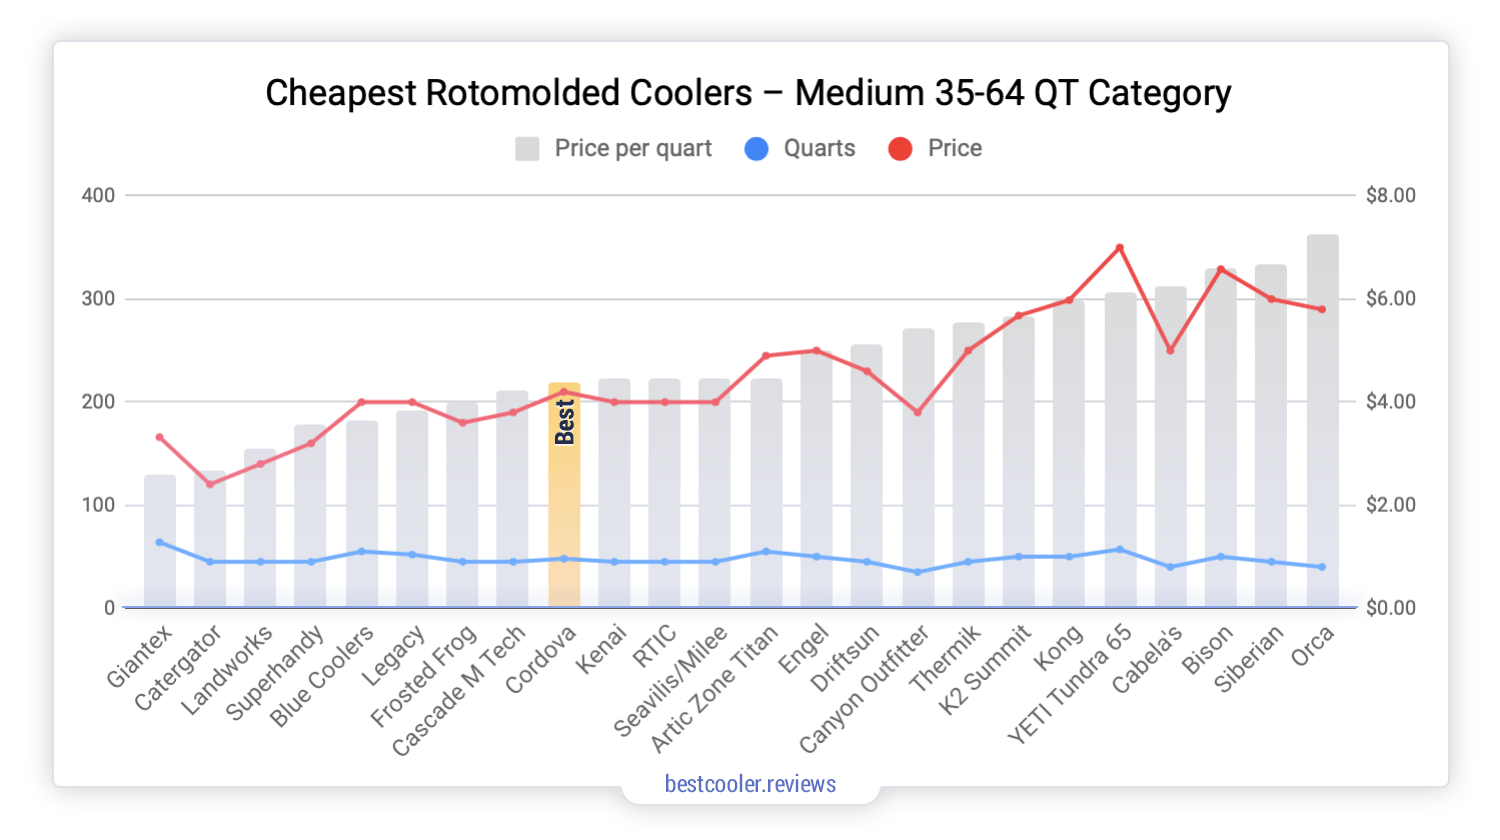 Cheapest Rotomolded Coolers Medium Category